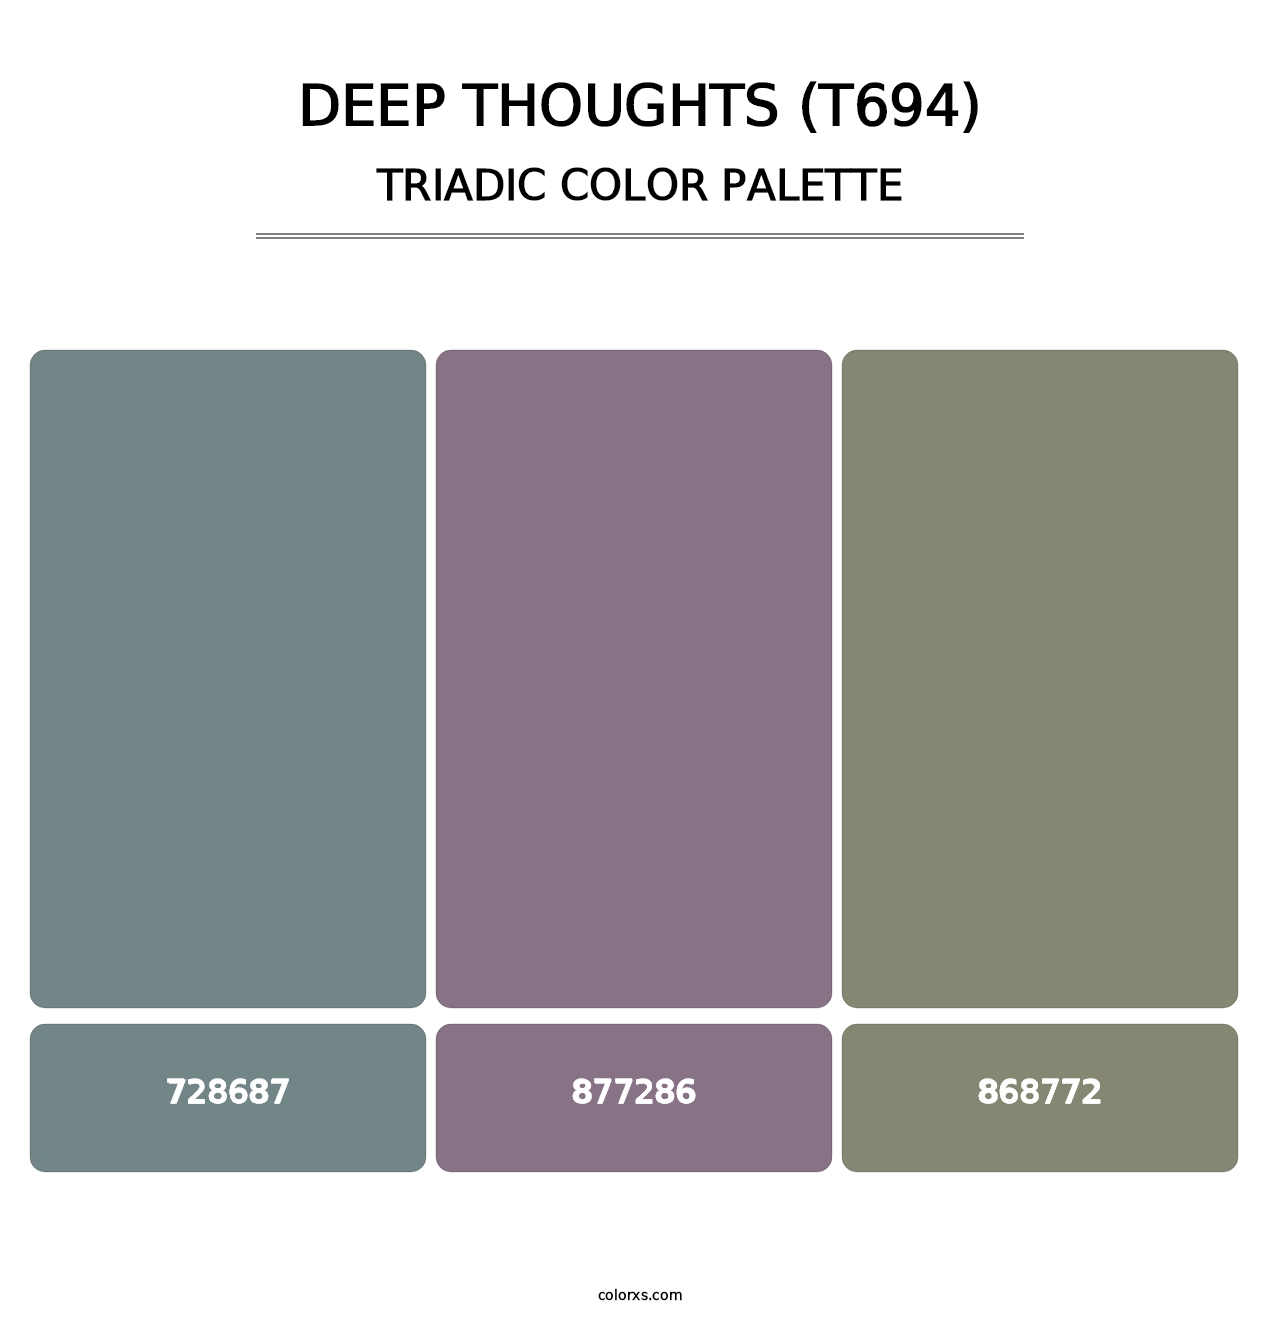 Deep Thoughts (T694) - Triadic Color Palette